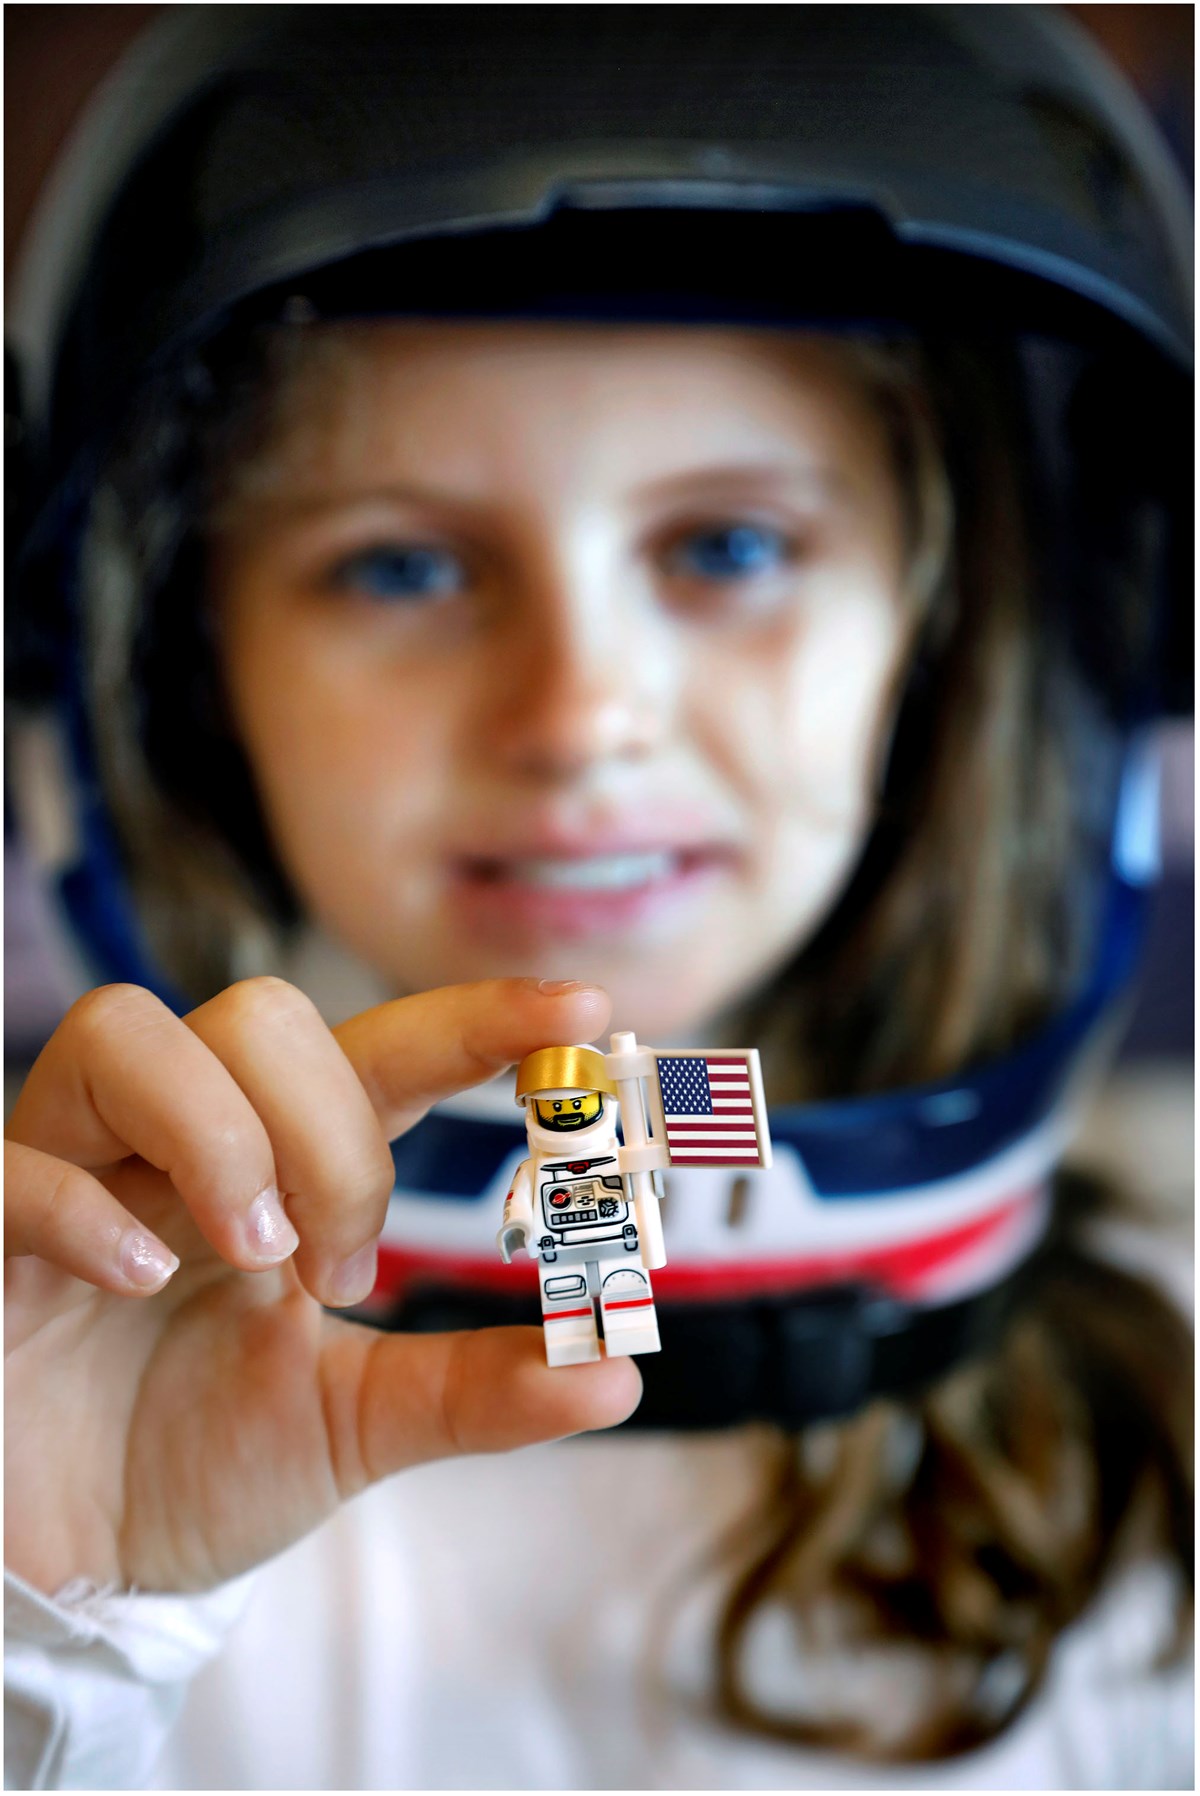 Chloe Spencer (9) looks forward the opening of the National Museum of Flight’s Brick History LEGO® display this Saturday.  Running at the East Lothian attraction until 5 November, the display depicts pivotal moments in world history in LEGO® and is accompanied by hands-on family events including the chance to build a LEGO® Saturn V space rocket at a Big Build Weekend on 26 and 27 August. Credit: Paul Dodds